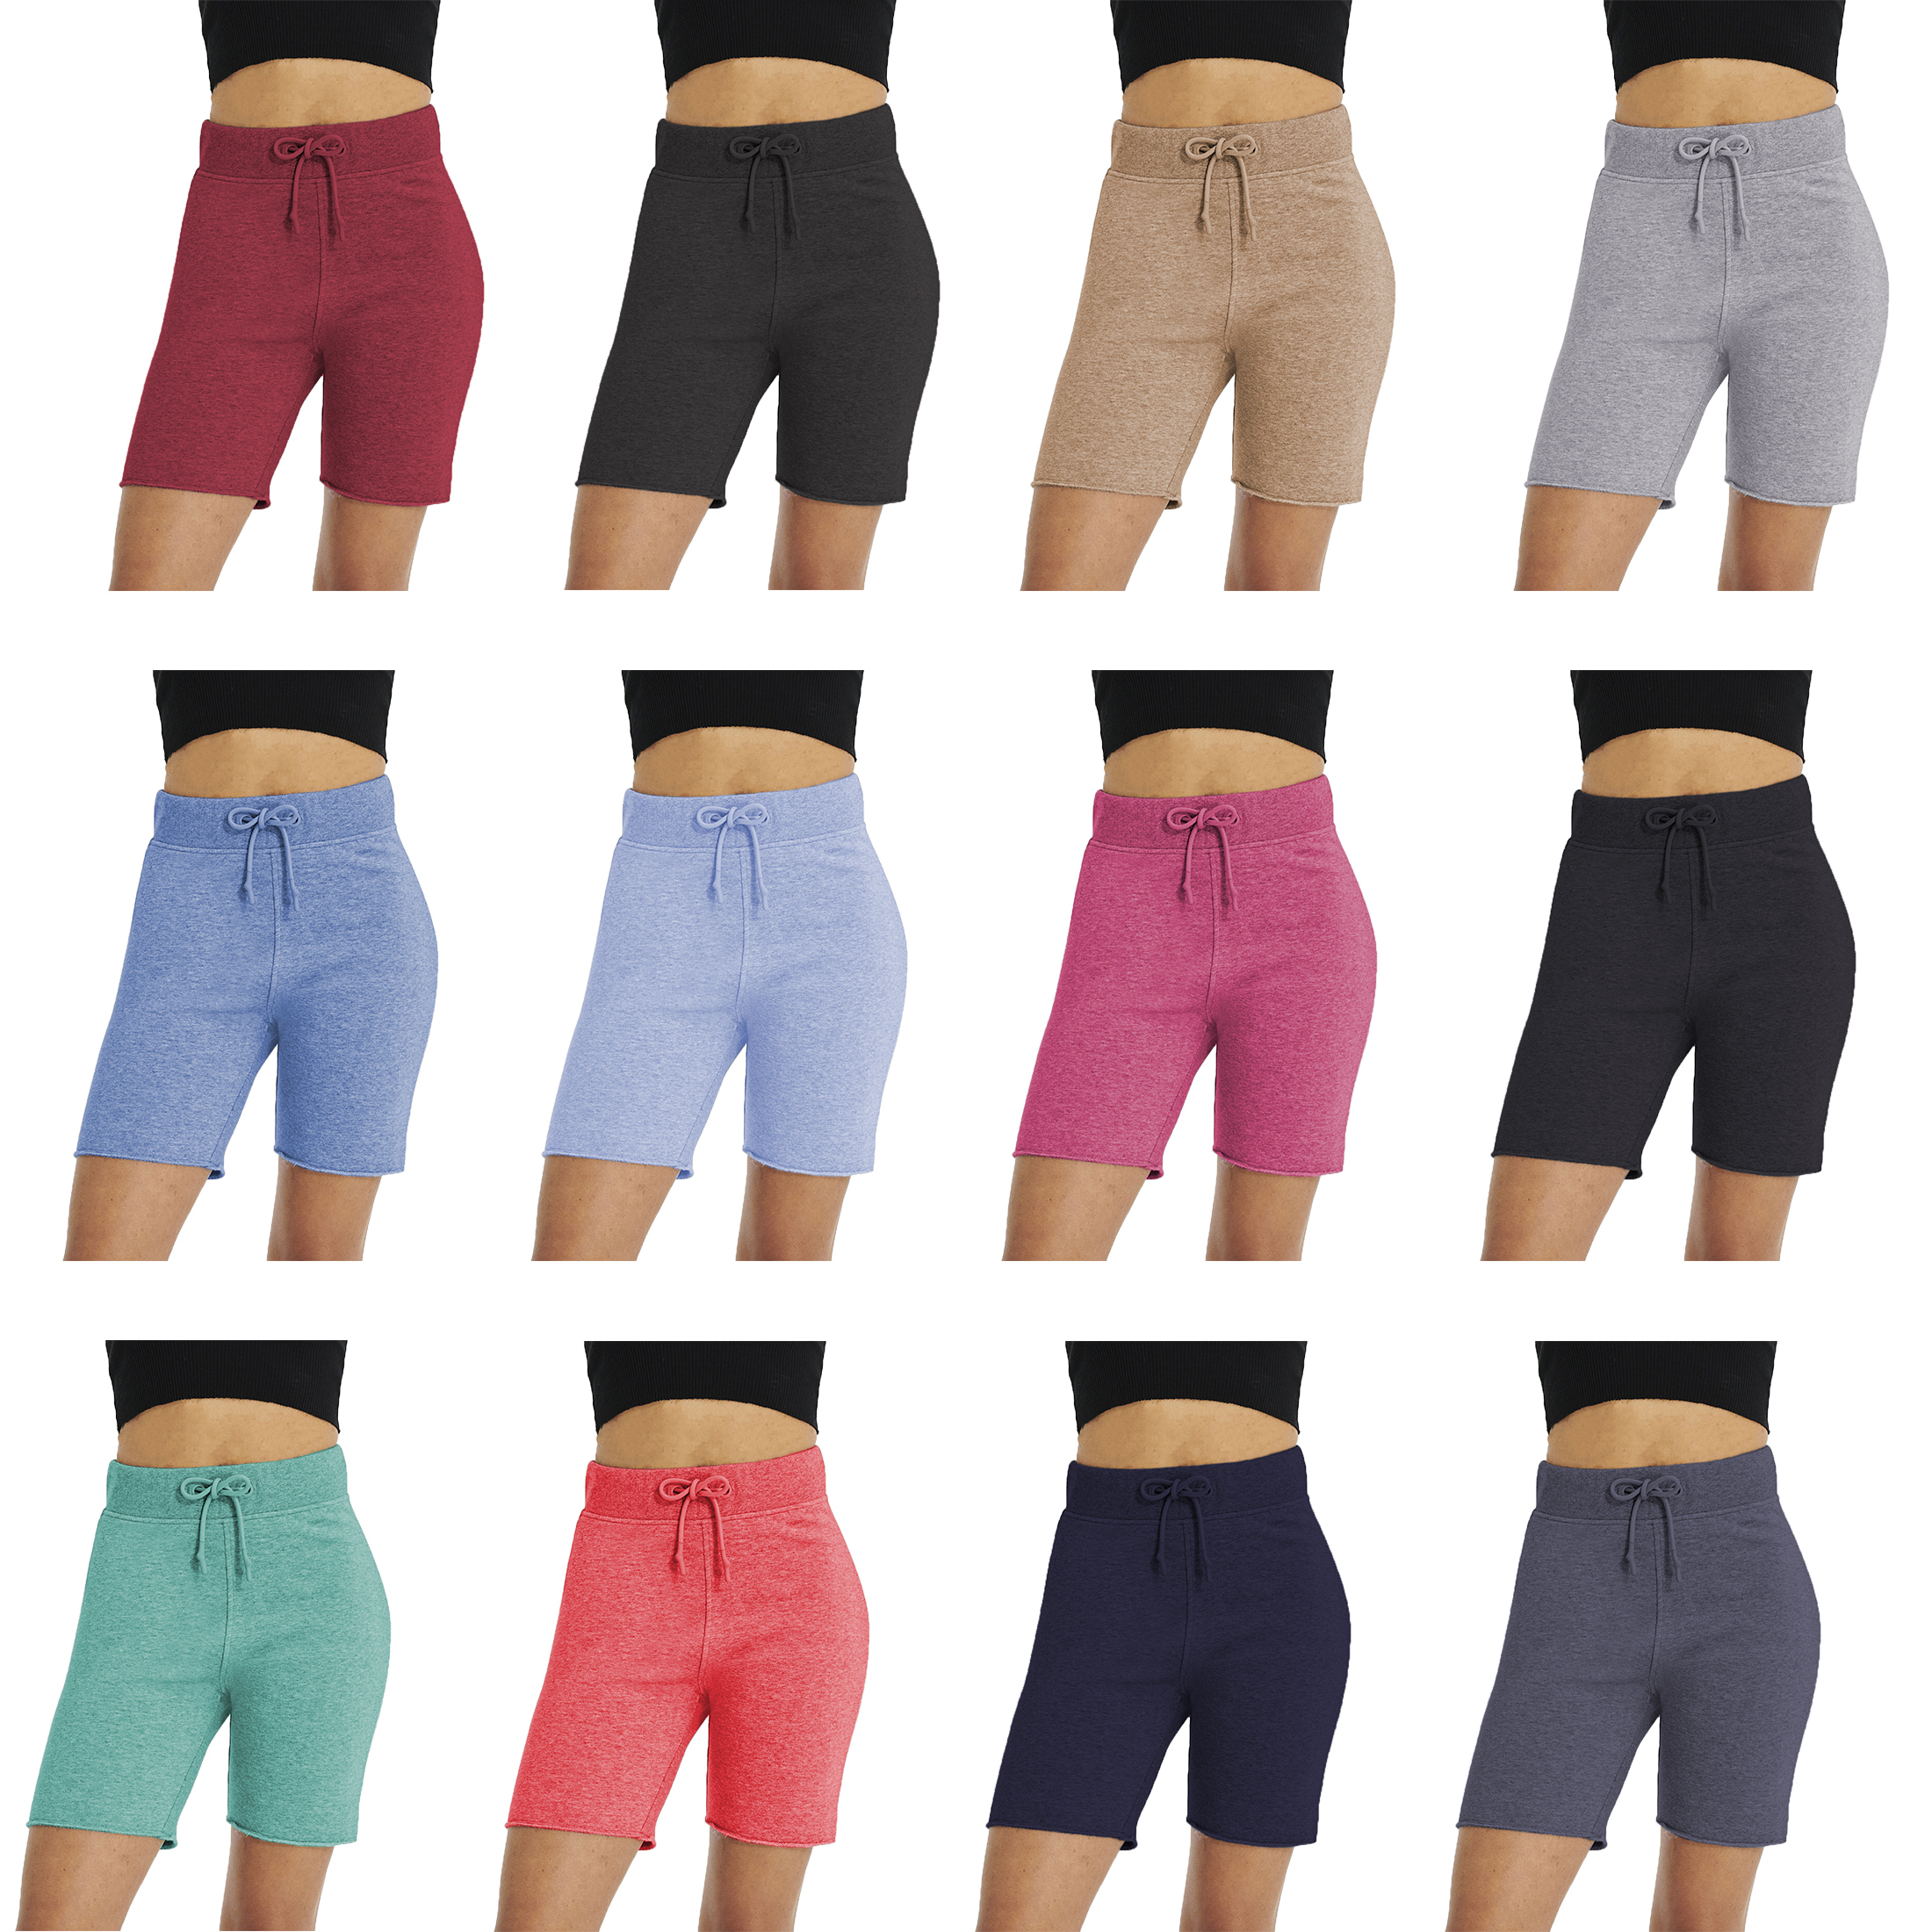 3-Pack: Ladies Soft Summer Stretch Active Athletic Lounge Sports Workout Bermuda Shorts - XX-Large